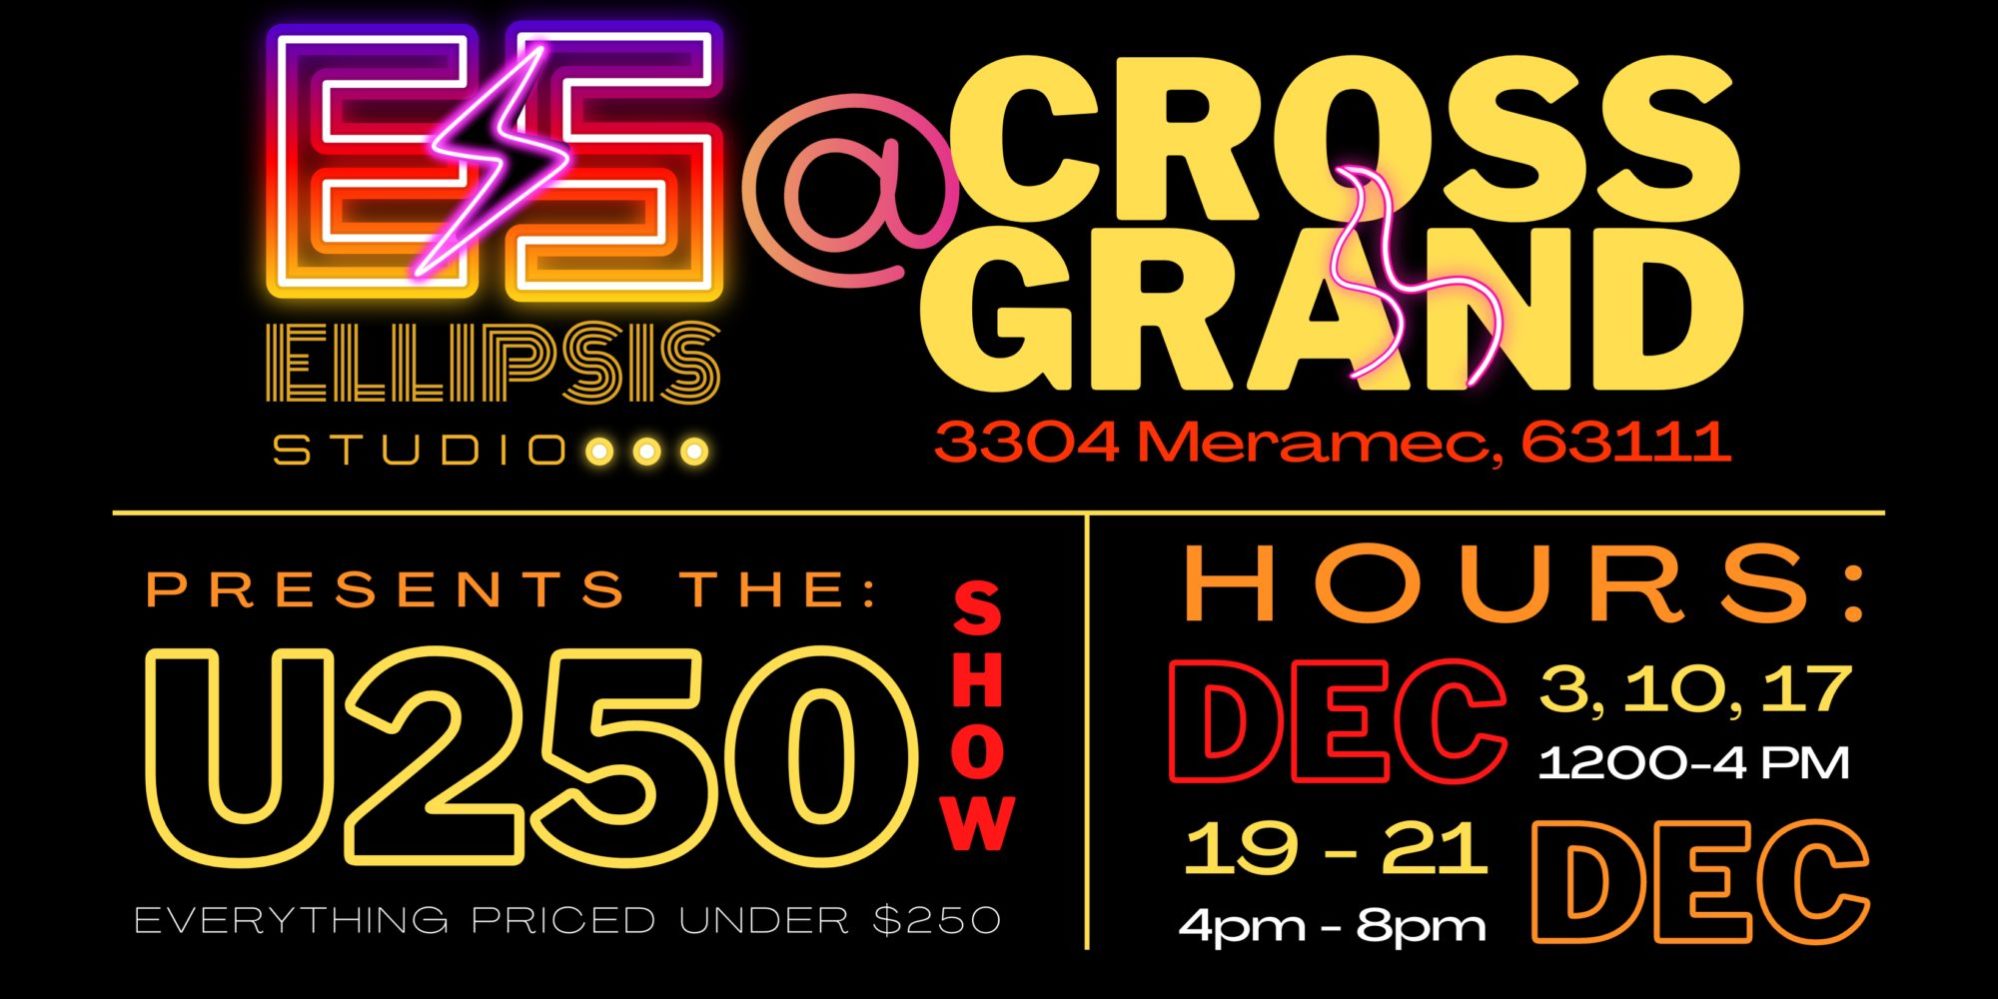 Ellipsis Studio presents the U250 Show at Cross Grand in Downtown Dutchtown, featuring art by 25+ local artists priced at $250 and under.